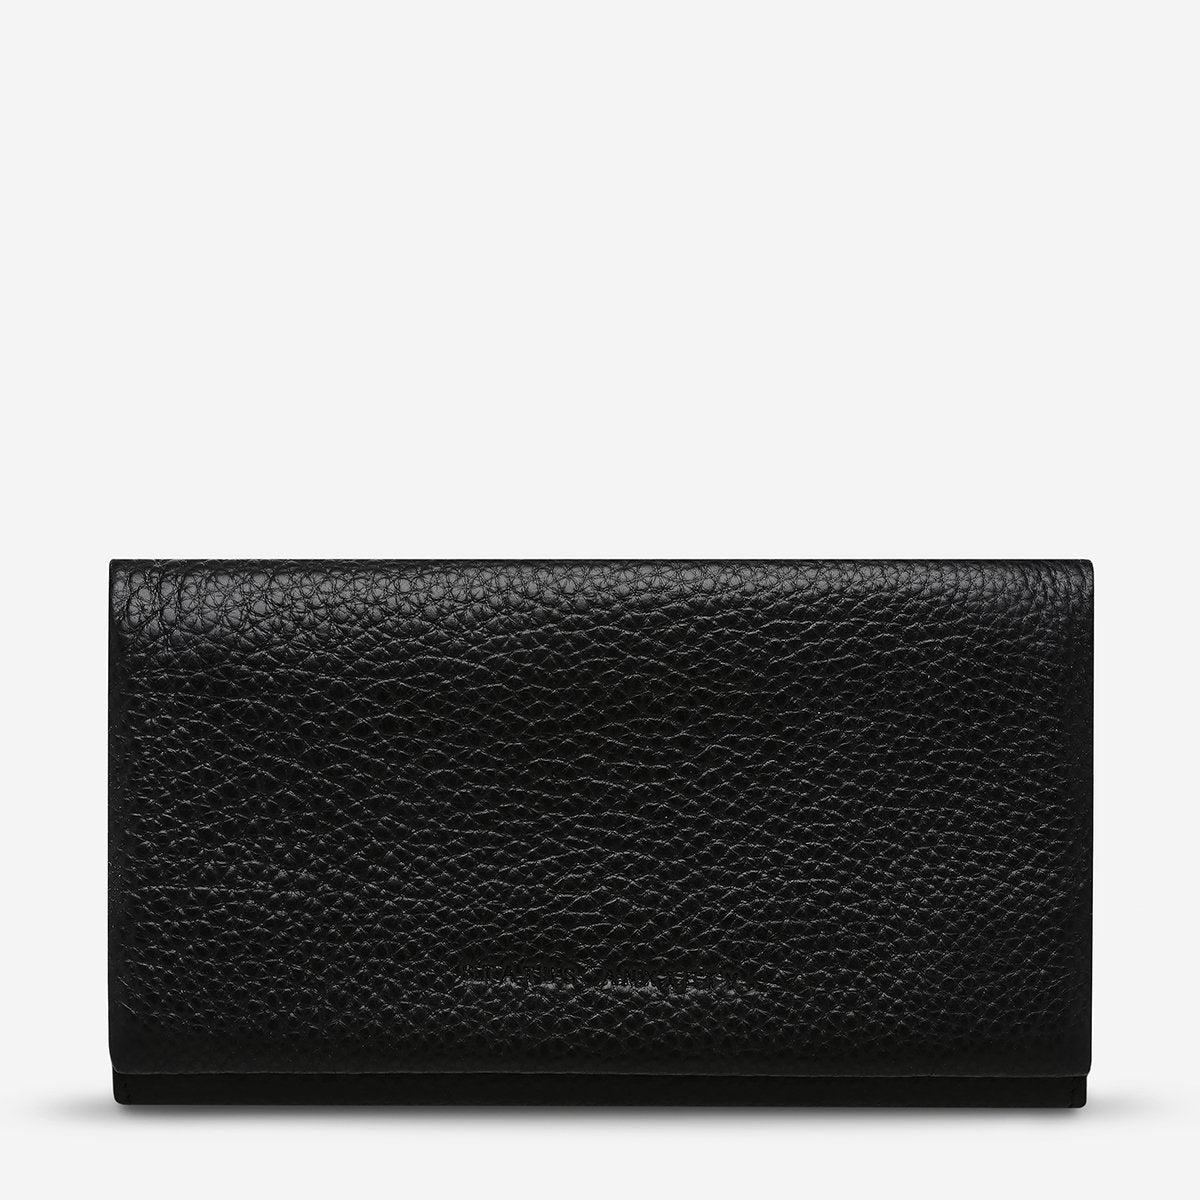 STATUS ANXIETY NEVERMIND WALLET BLACK